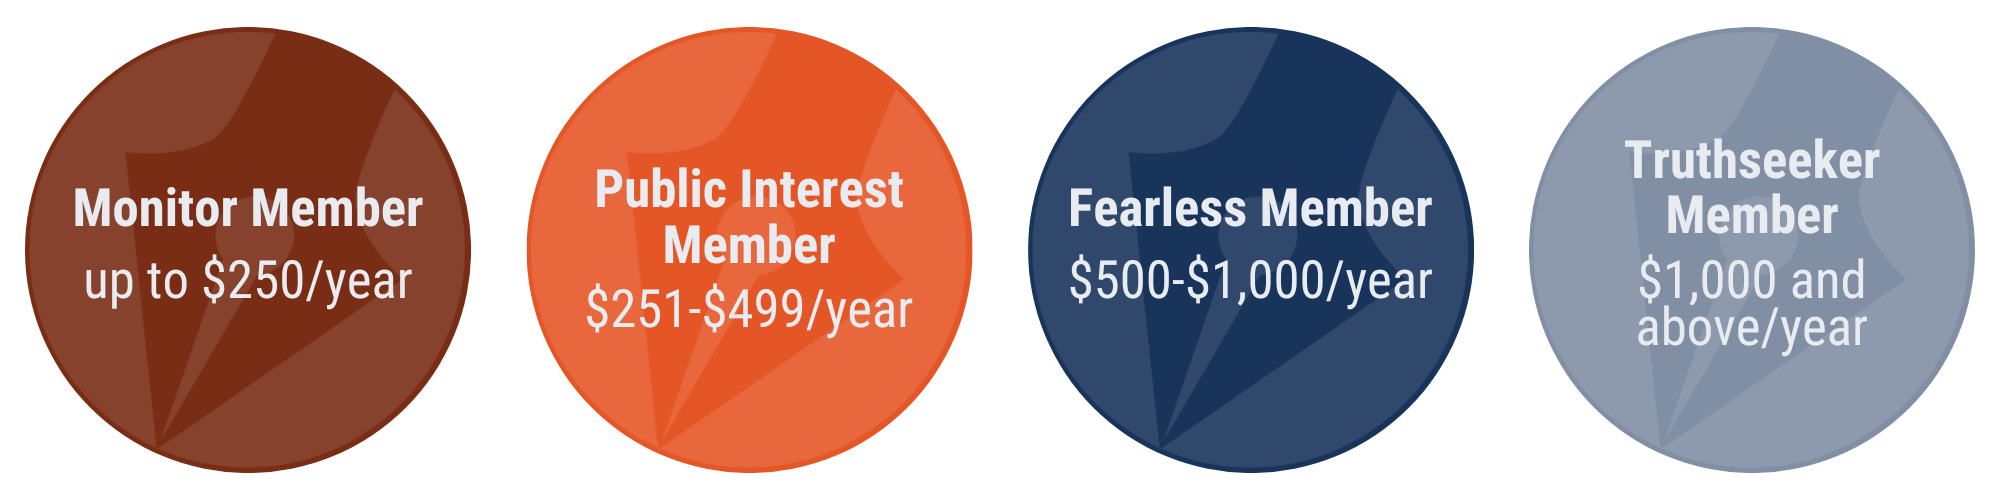 A graphic detailing the four donor tiers of The Maine Monitor newsroom. Those giving up to $250 per year are called Monitor Members. Those giving up to $500 are called public interest members. Those giving up to $1,000 are fearless members. Those giving over $1,000 are truthseeker members. 